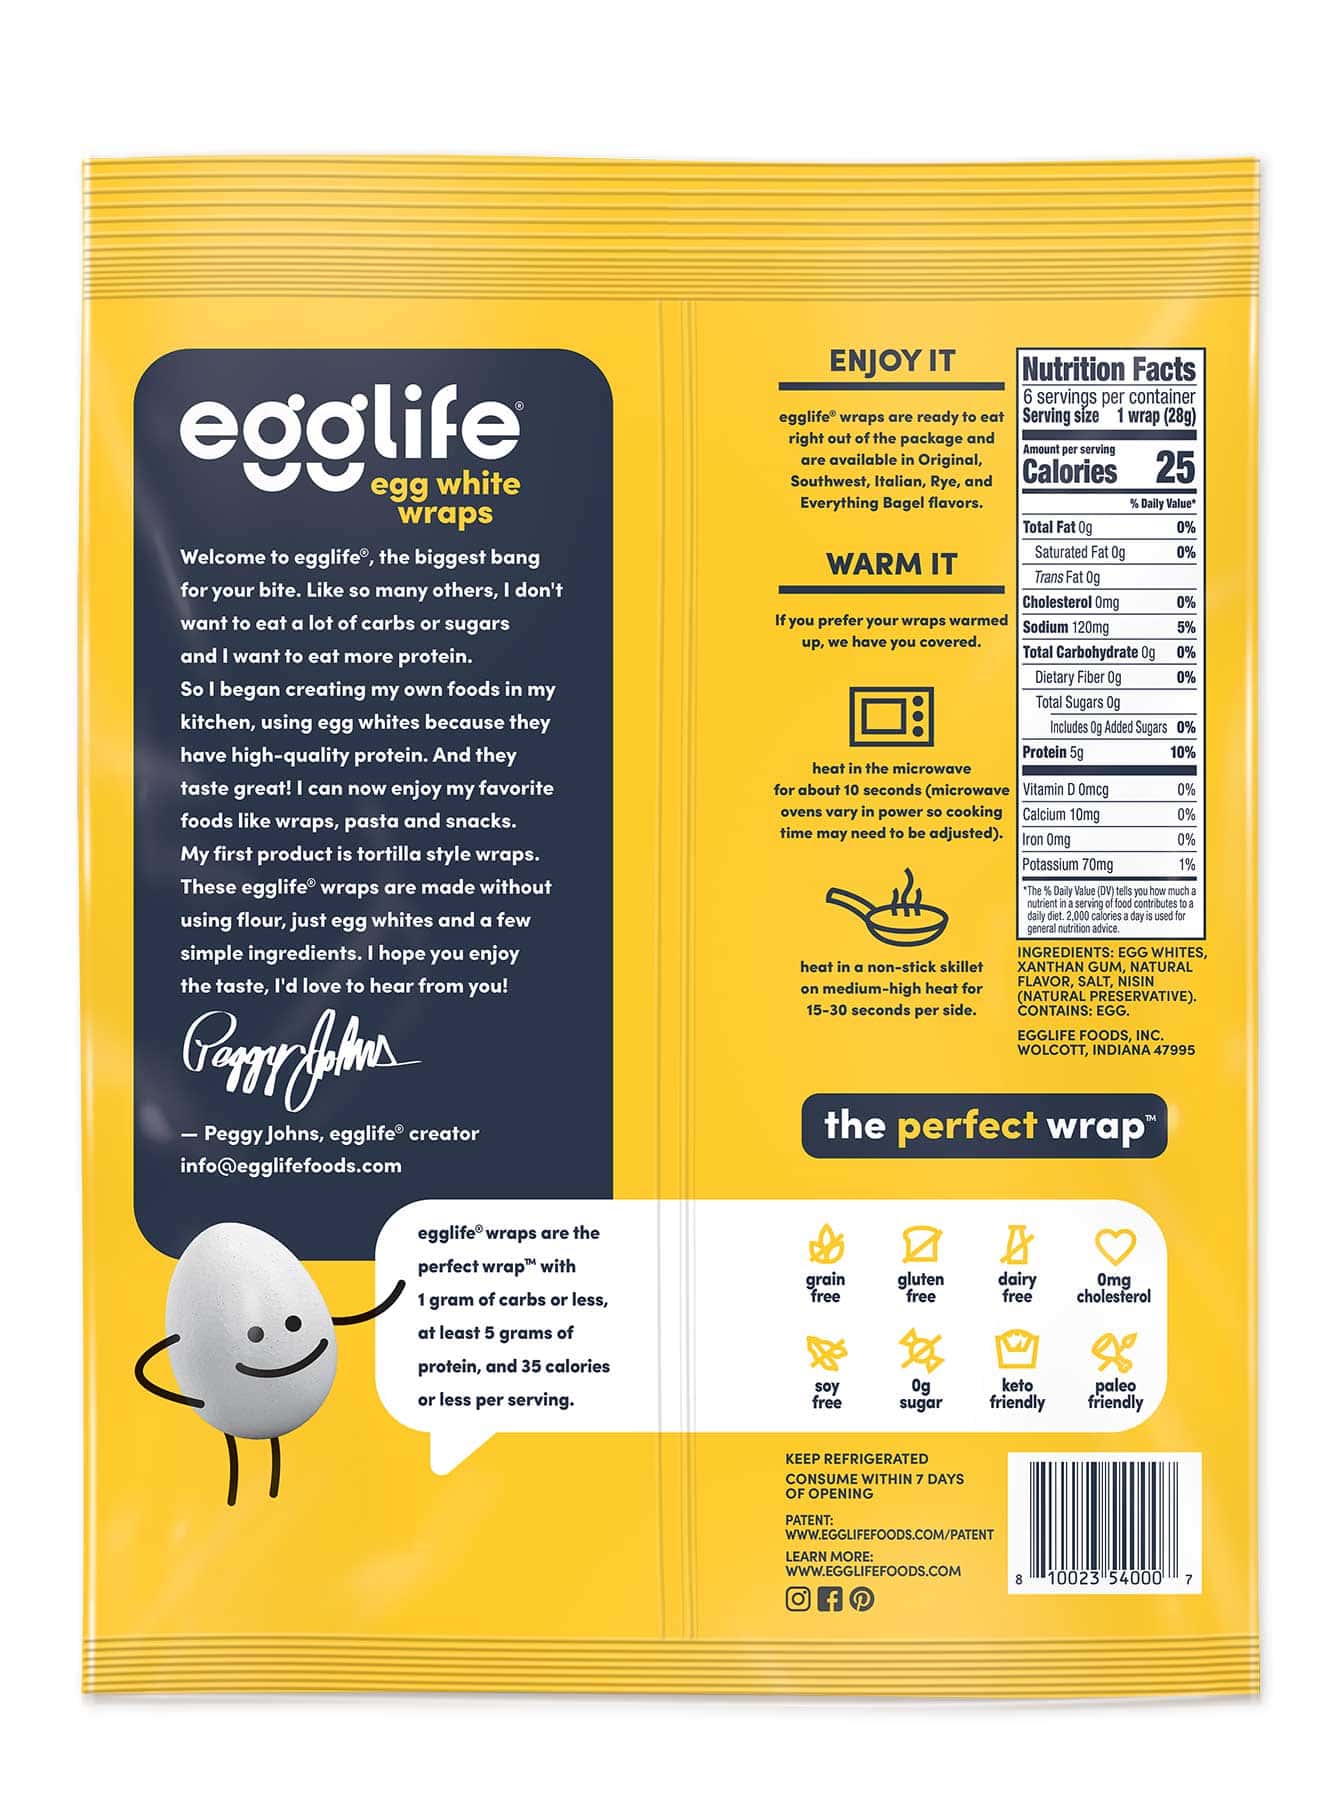 Egglife Egg White Wraps Ingredients & Nutrition Facts